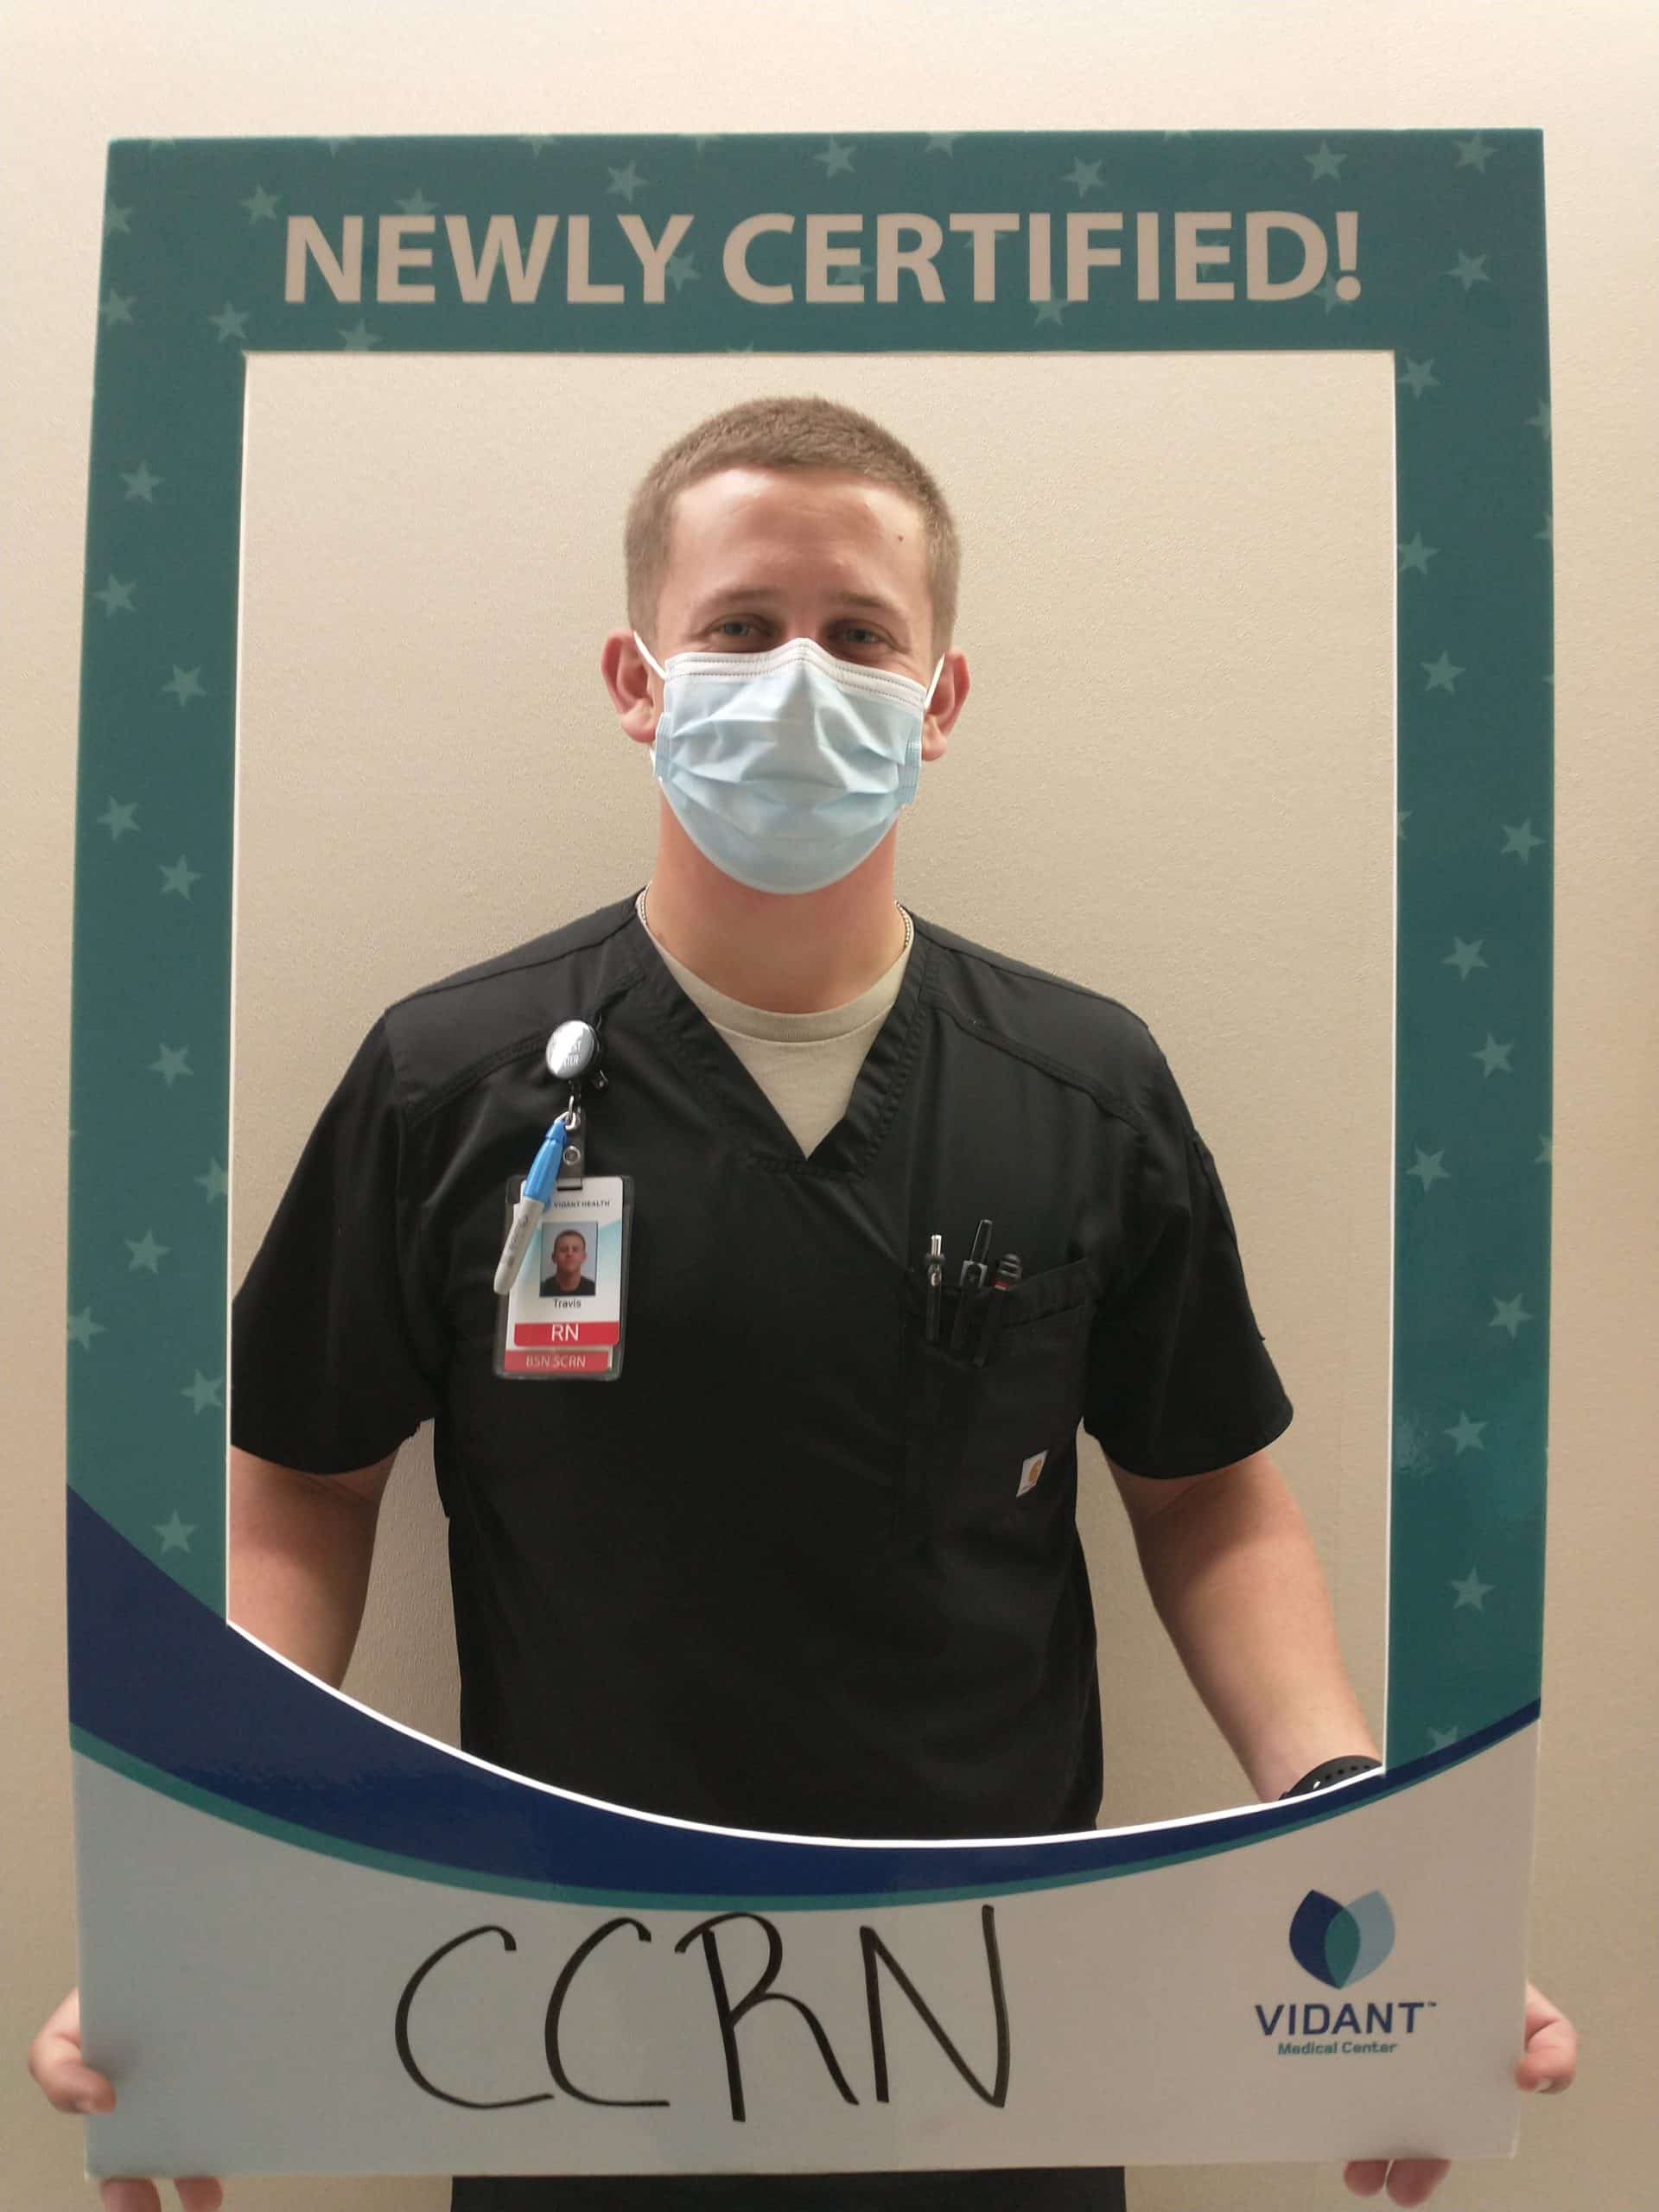 Travis Craney, BSN, RN, CCRN, SCRN works in Neuroscience Intensive Care Unit and received his critical care registered nurse certification